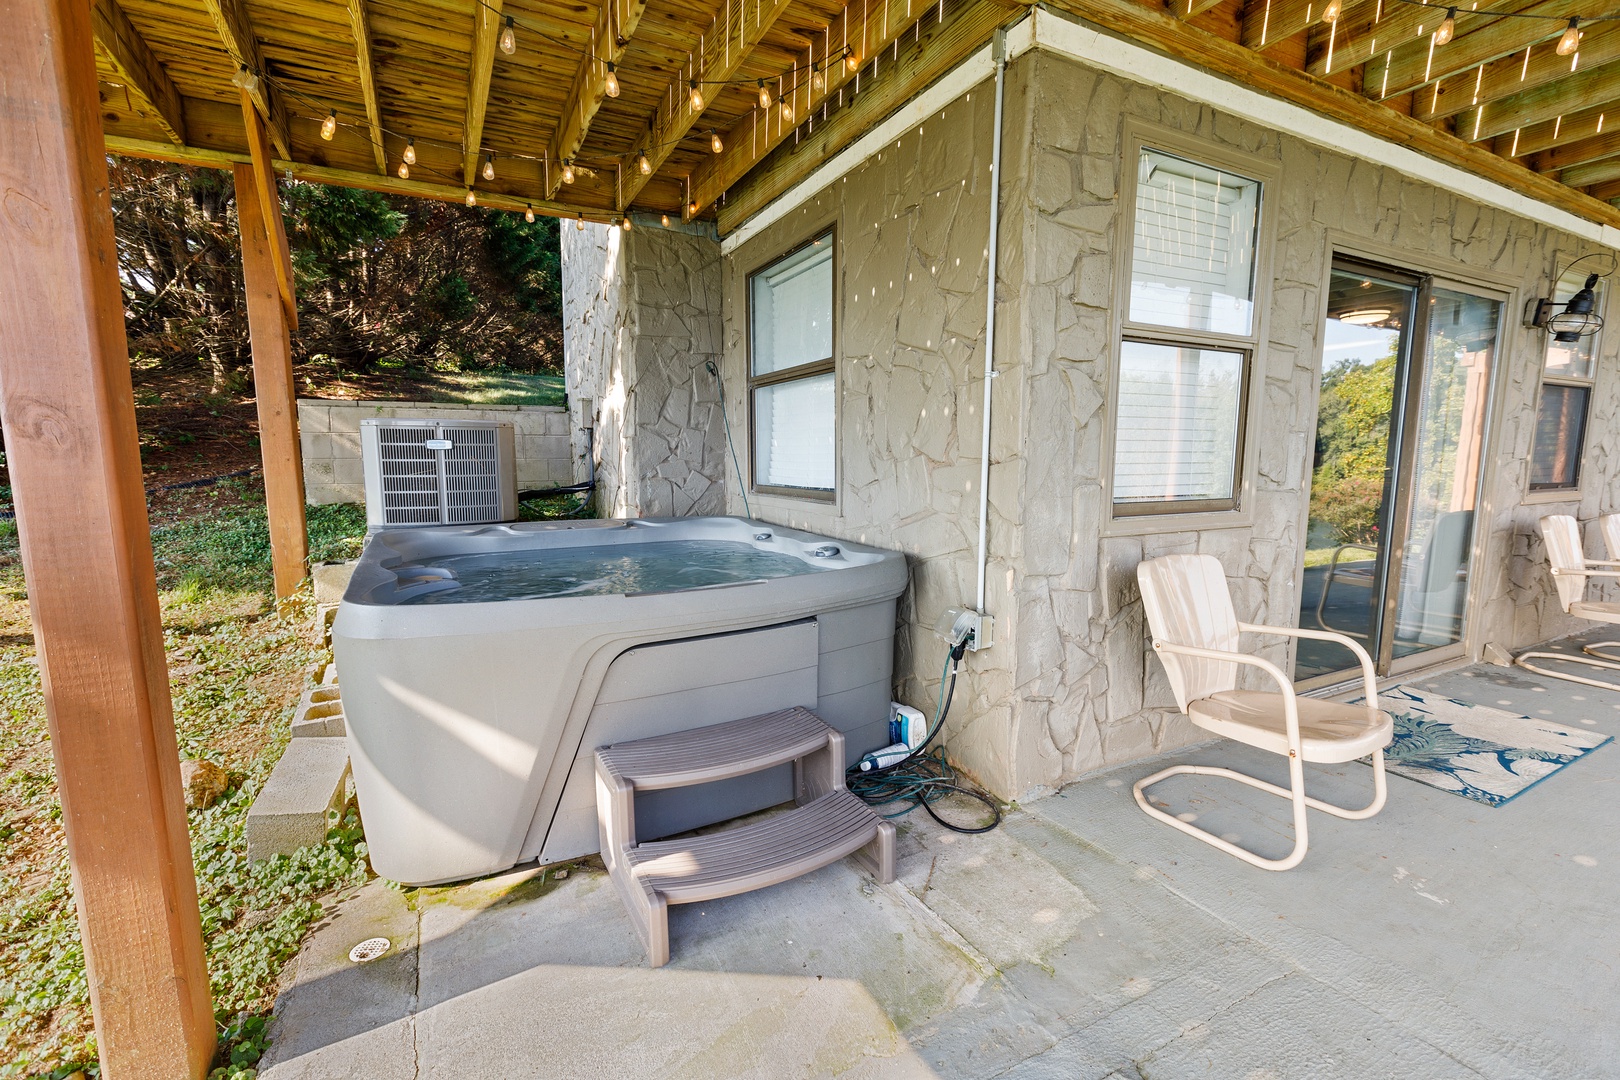 Private hot tub for you and your guests to enjoy